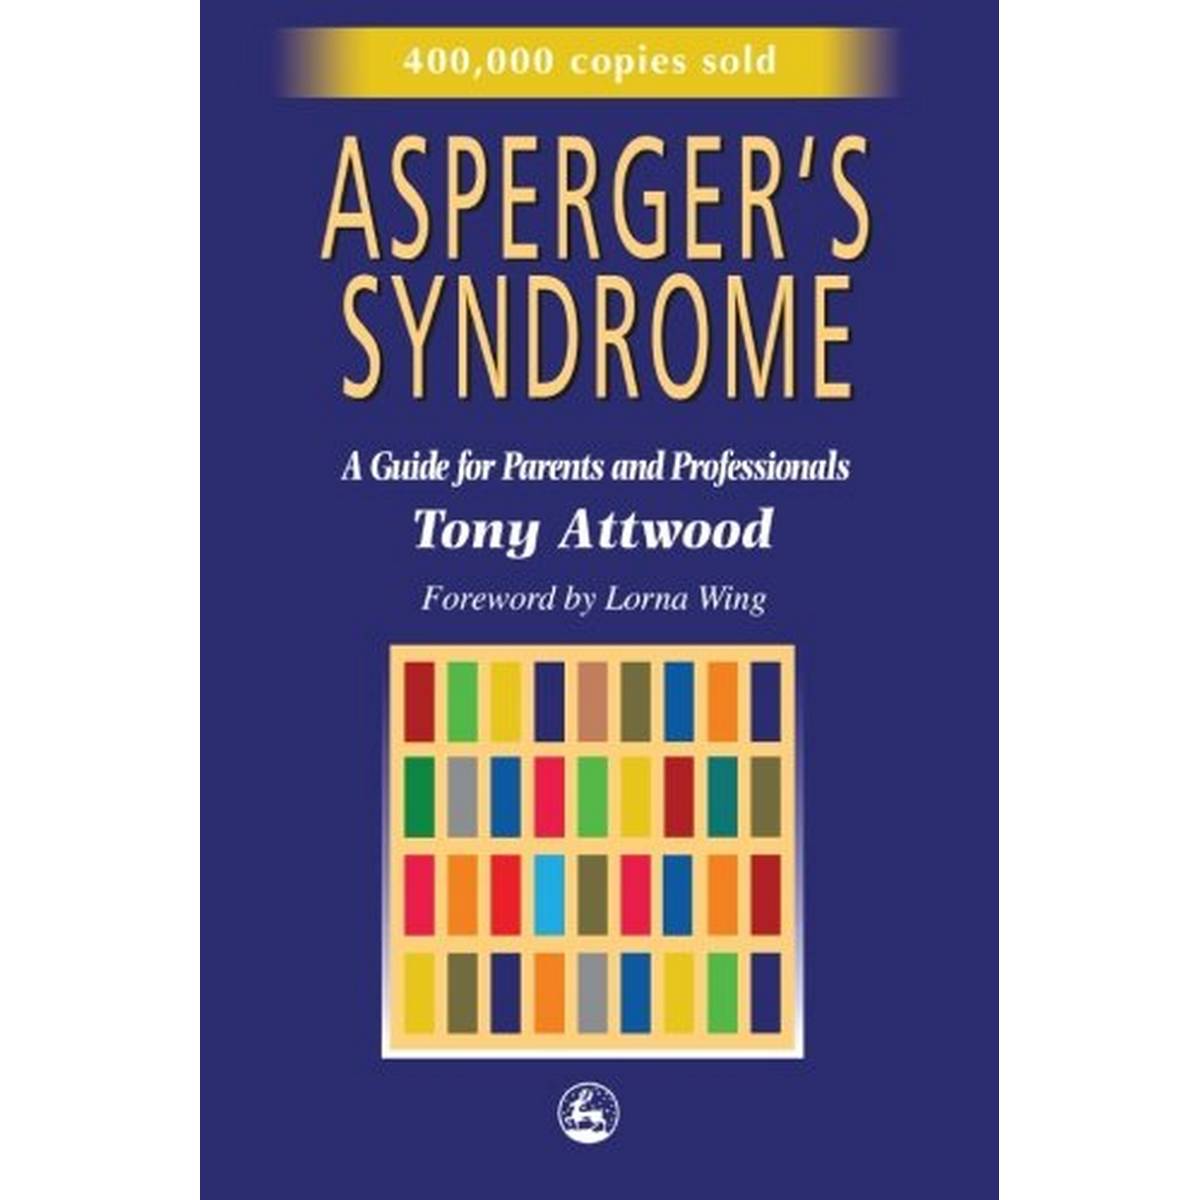 Asperger's Syndrome: A Guide for Parents and Professionals